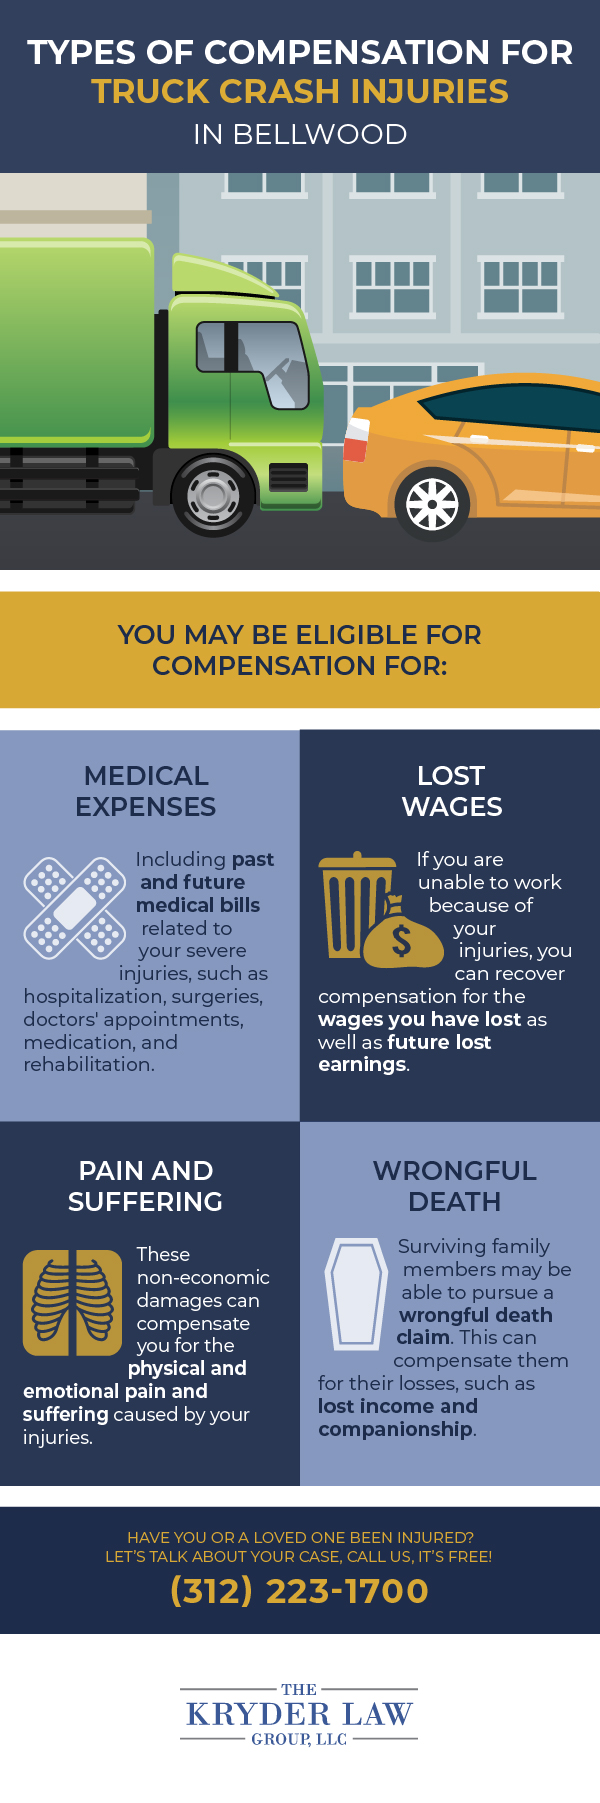 Types of Compensation for Truck Crash Injuries in Bellwood Infographic